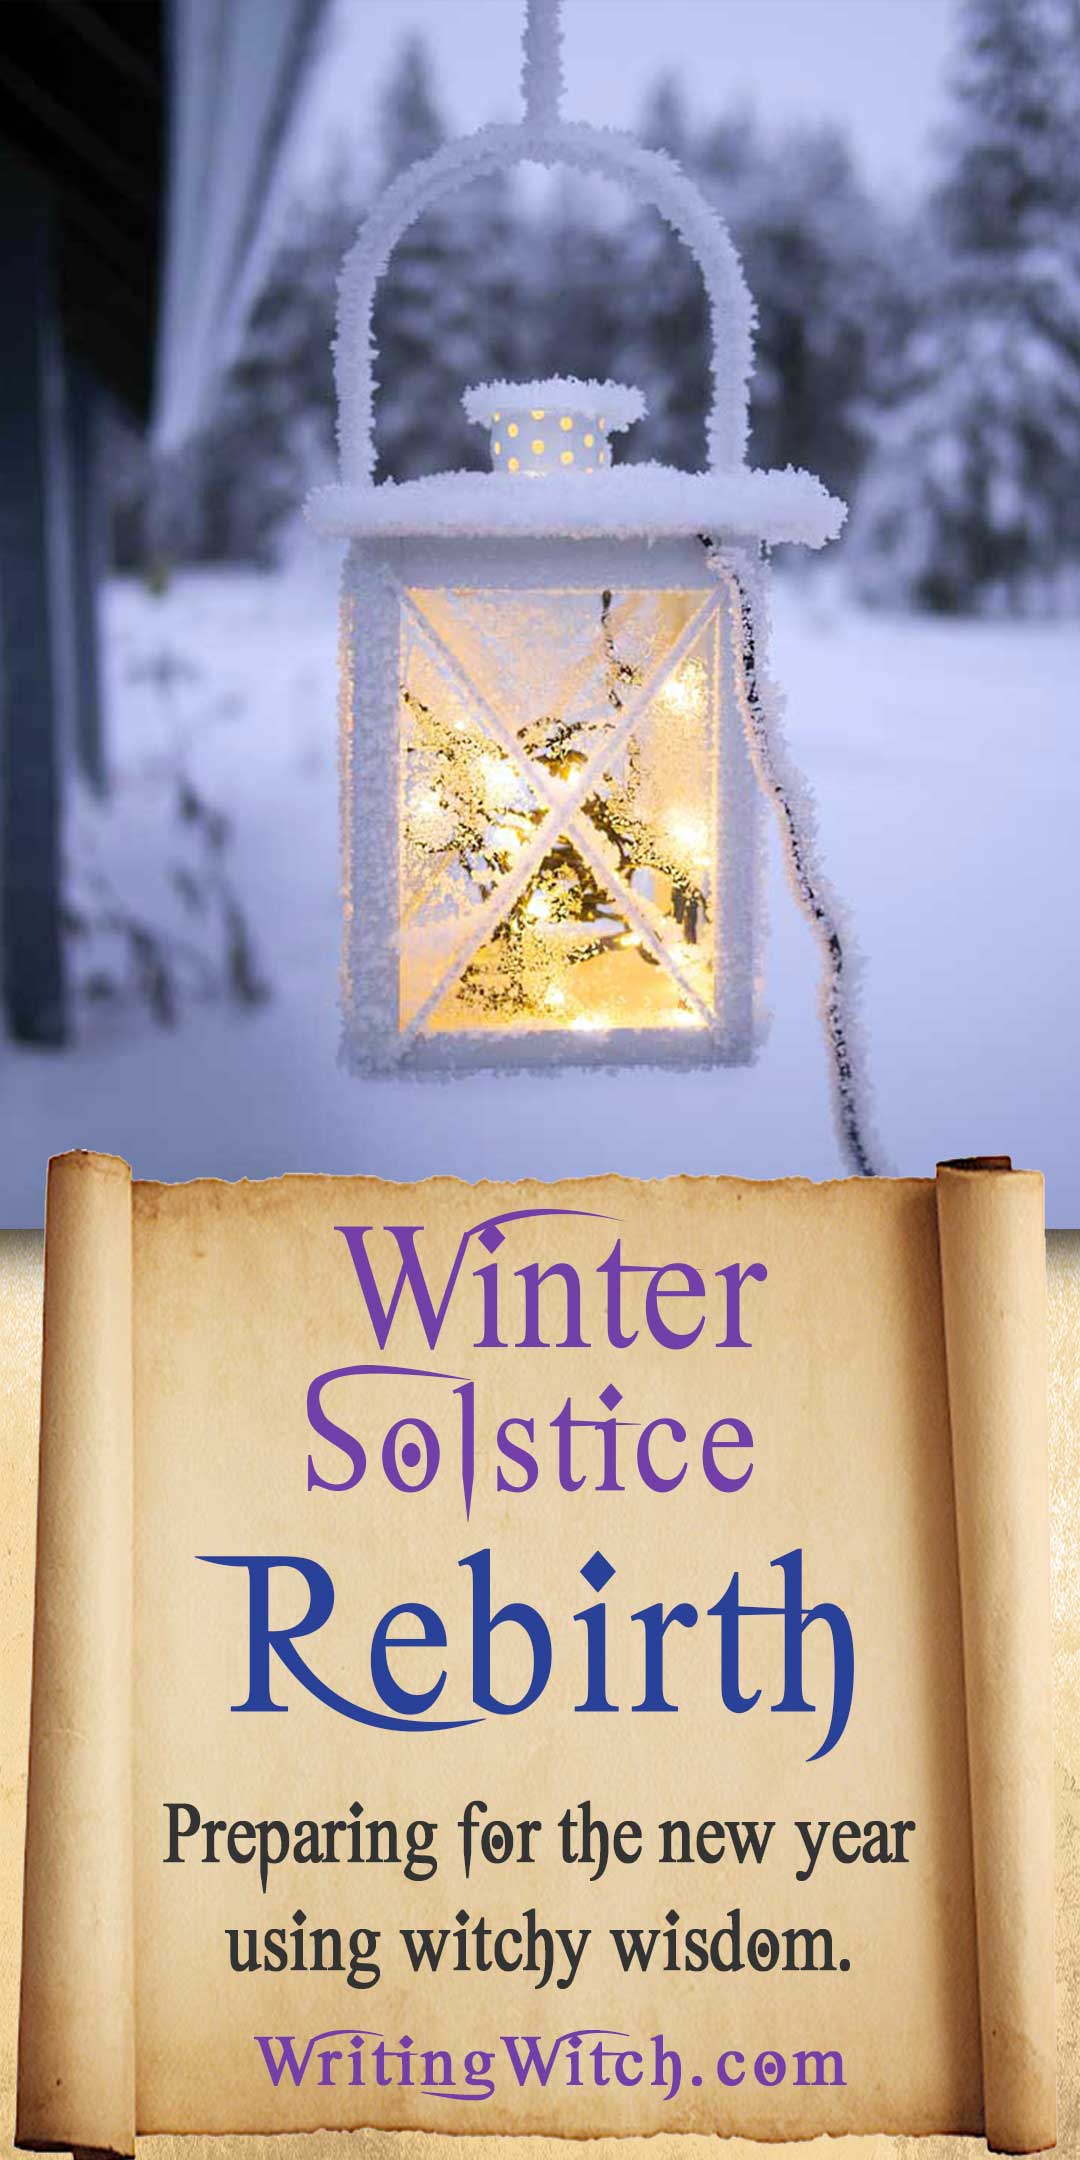 Winter Solstice / Yule: Preparing For The New Year